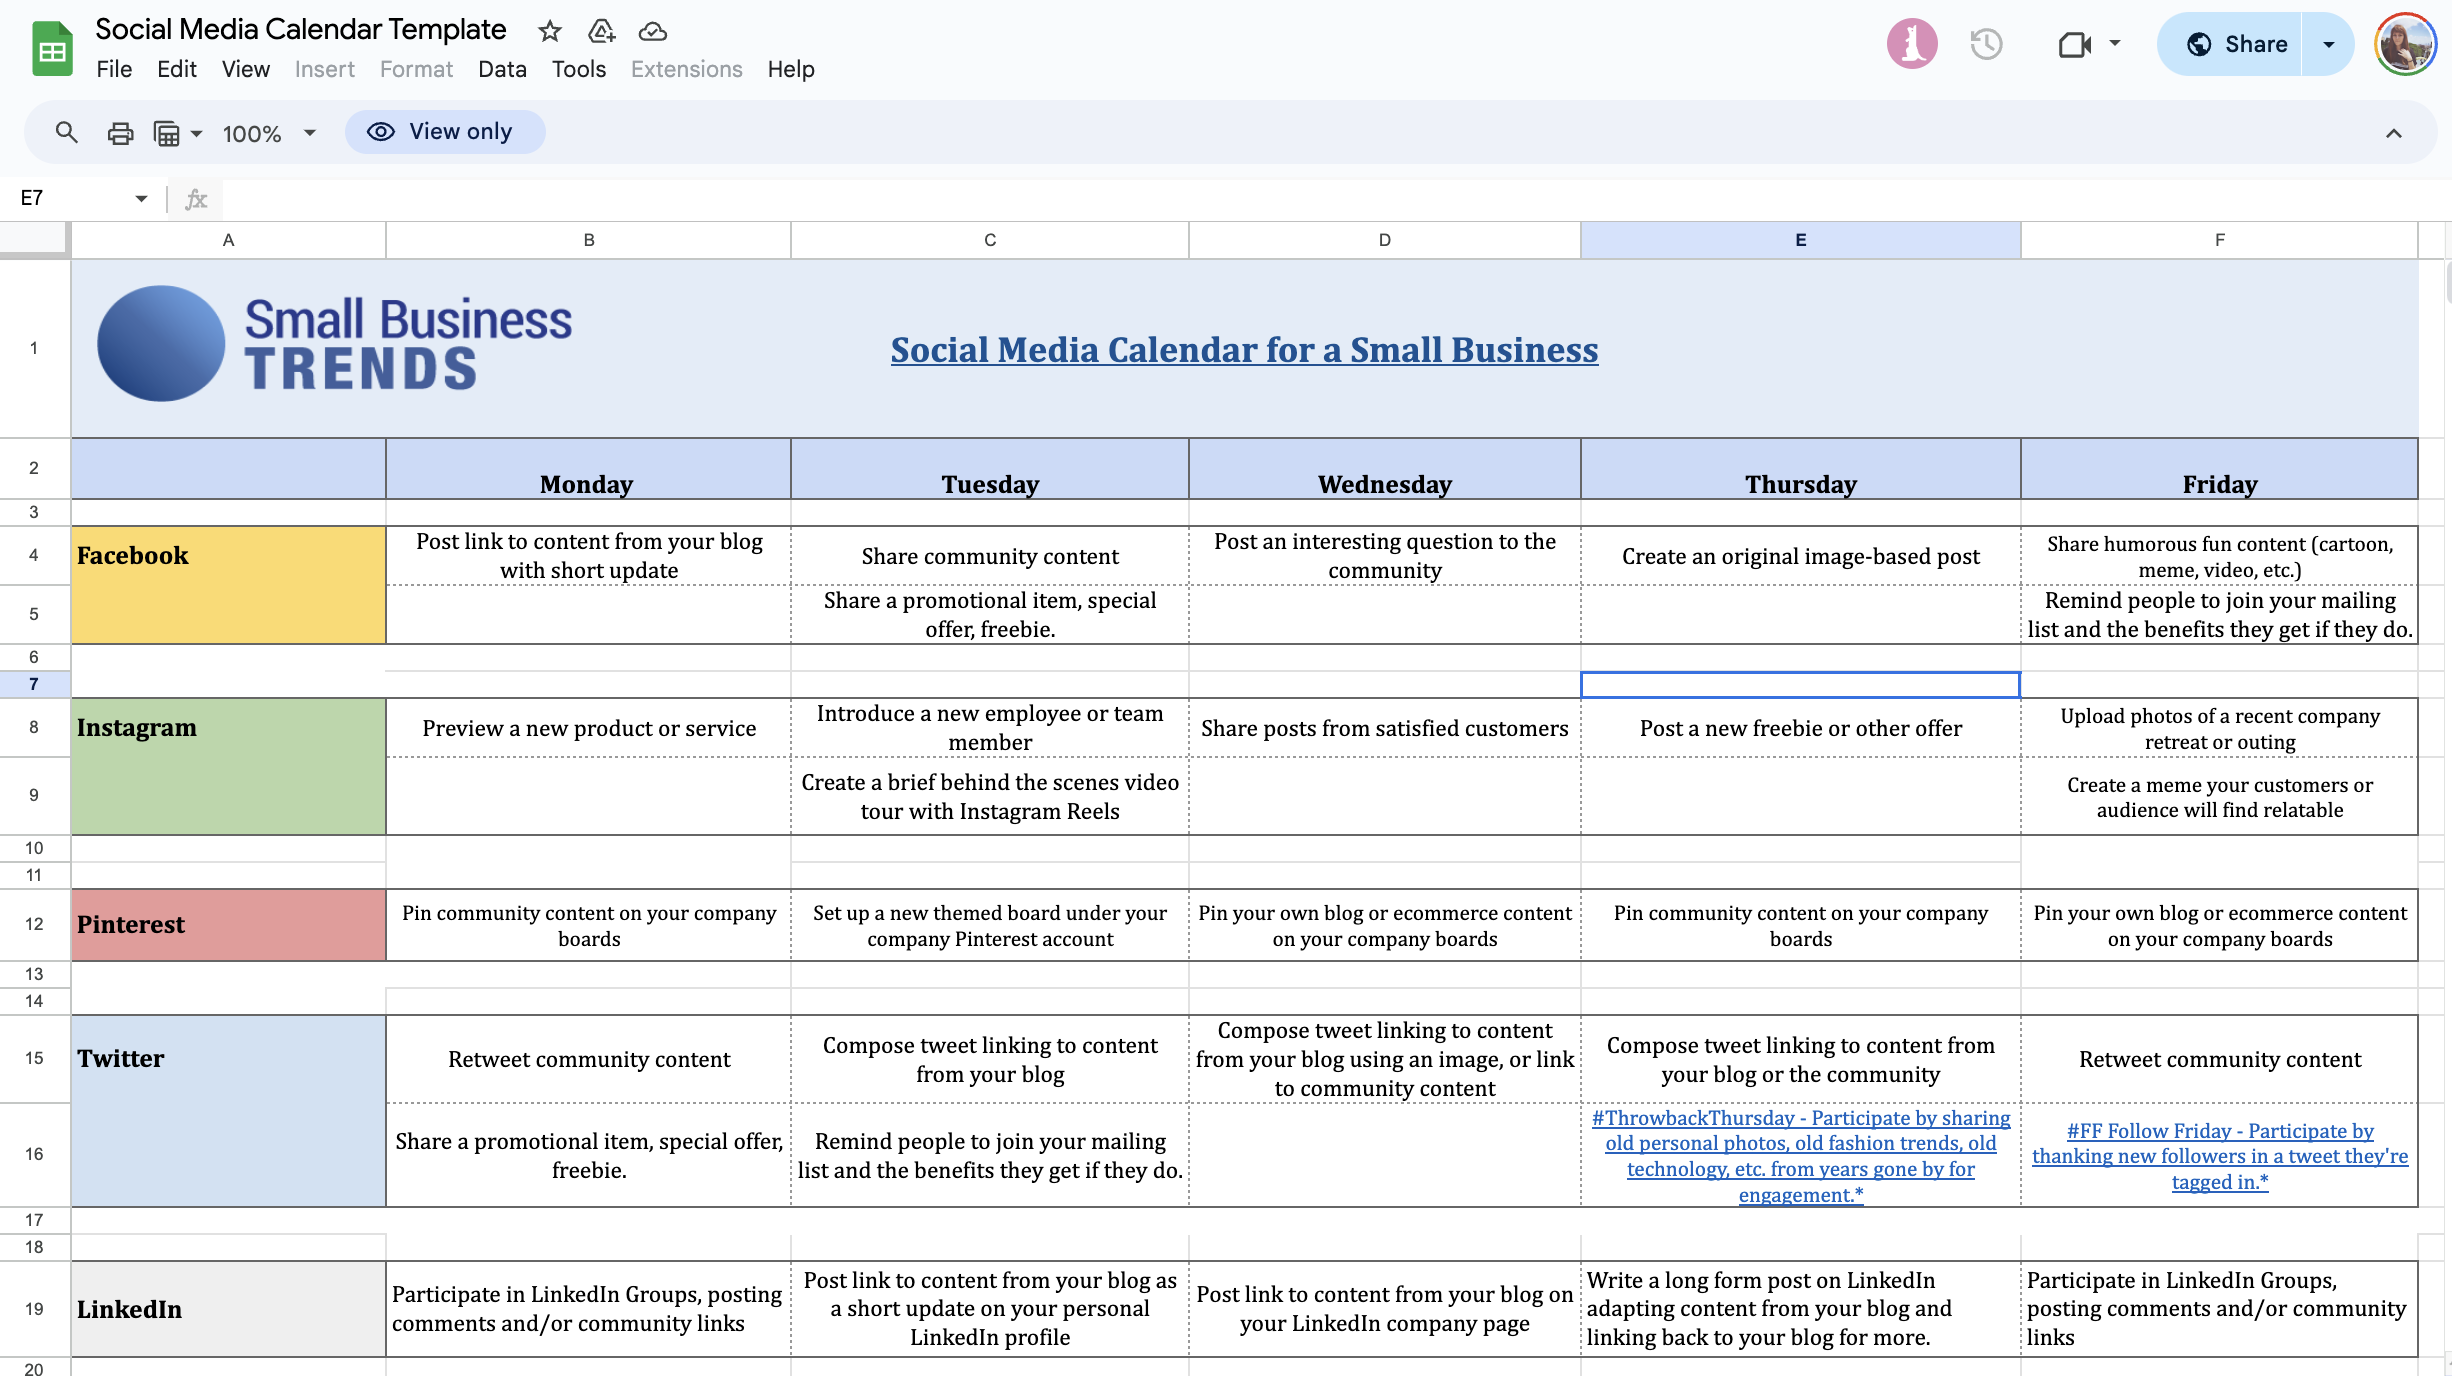 Screenshot of the best content calendar spreadsheet for 2024. The layout includes tabs for different platforms like Facebook, Instagram, Pinterest, Twitter, and LinkedIn with detailed daily posting strategies.